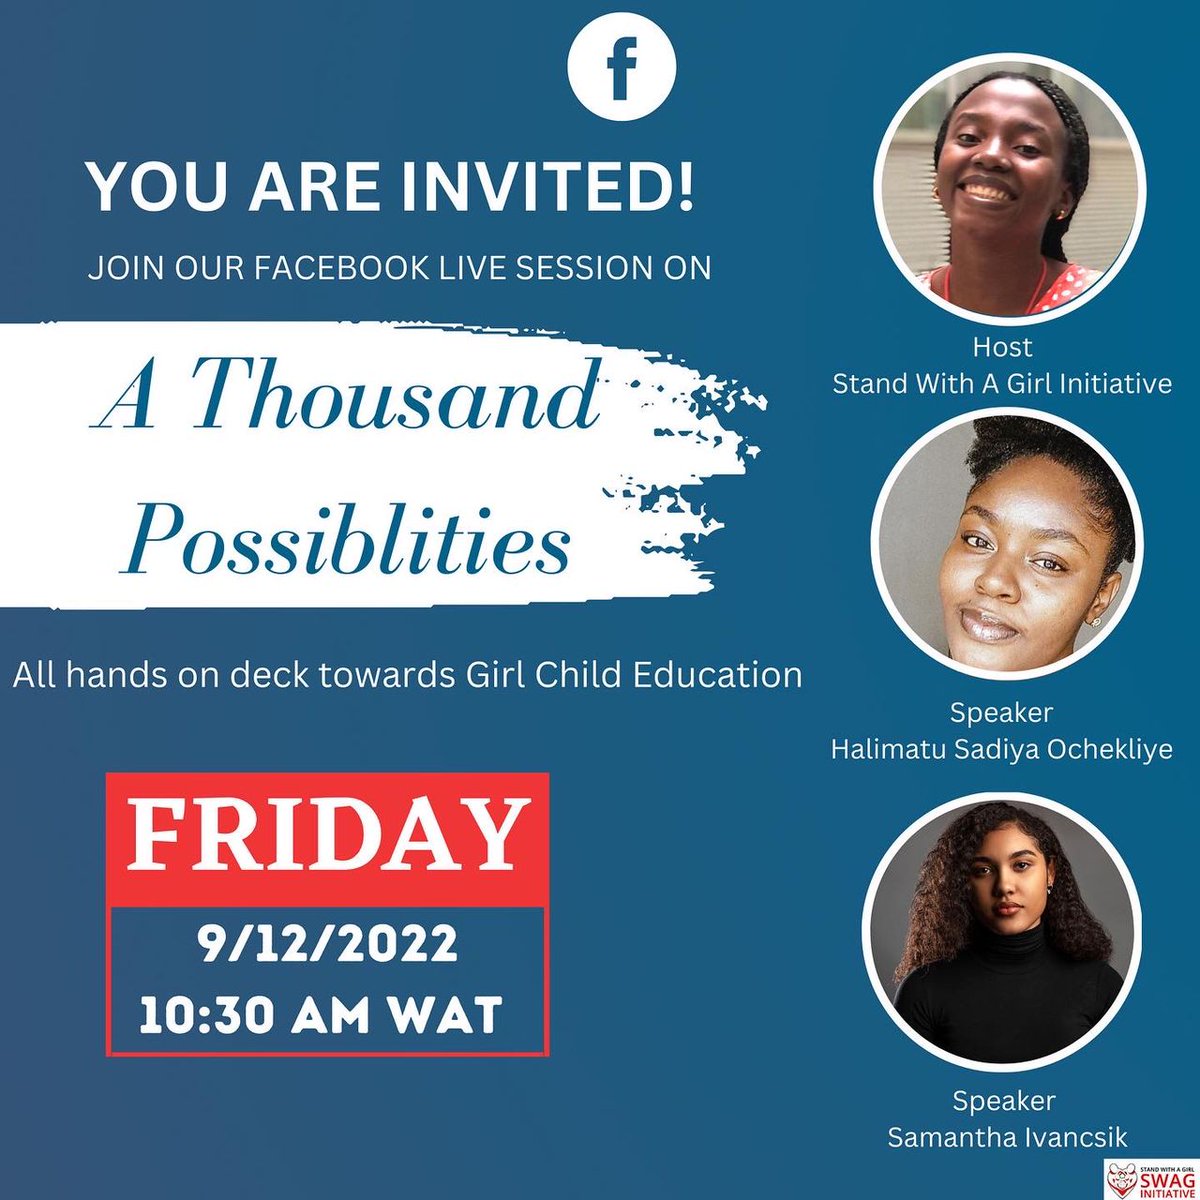 Hello there, What are you doing Thursday and Friday this week? Kindly accept this as an invitation to join our Twitter chat and Facebook live. The conversation promises to be both fun and enlightening, come and join us talk about the 1000 possibilities at the Wassa IDP camp.